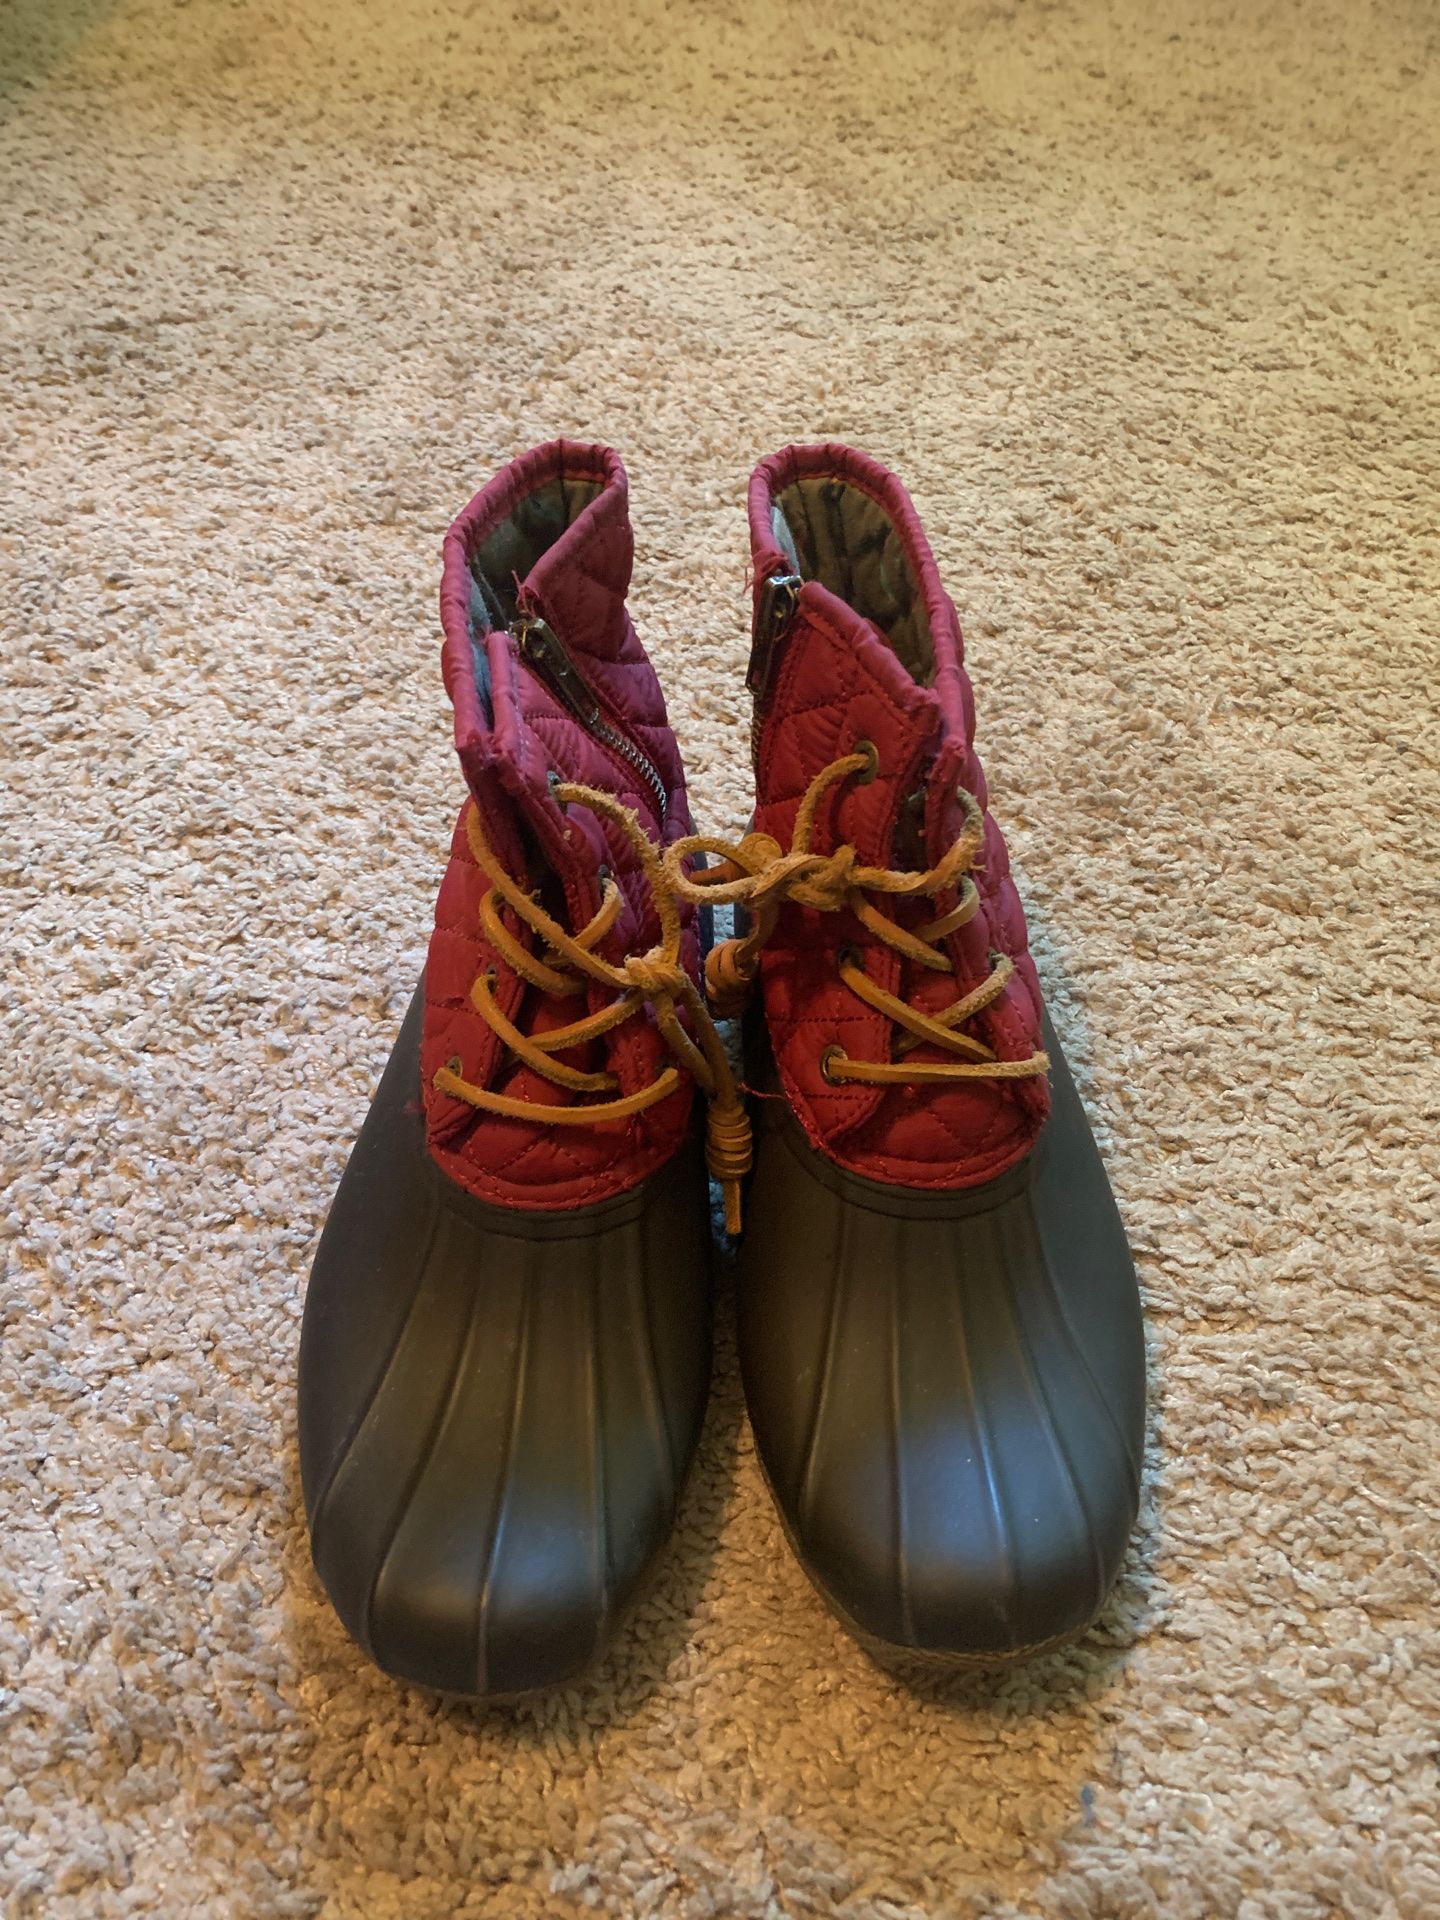 SPERRY TOP- SIDER RAIN BOOTS